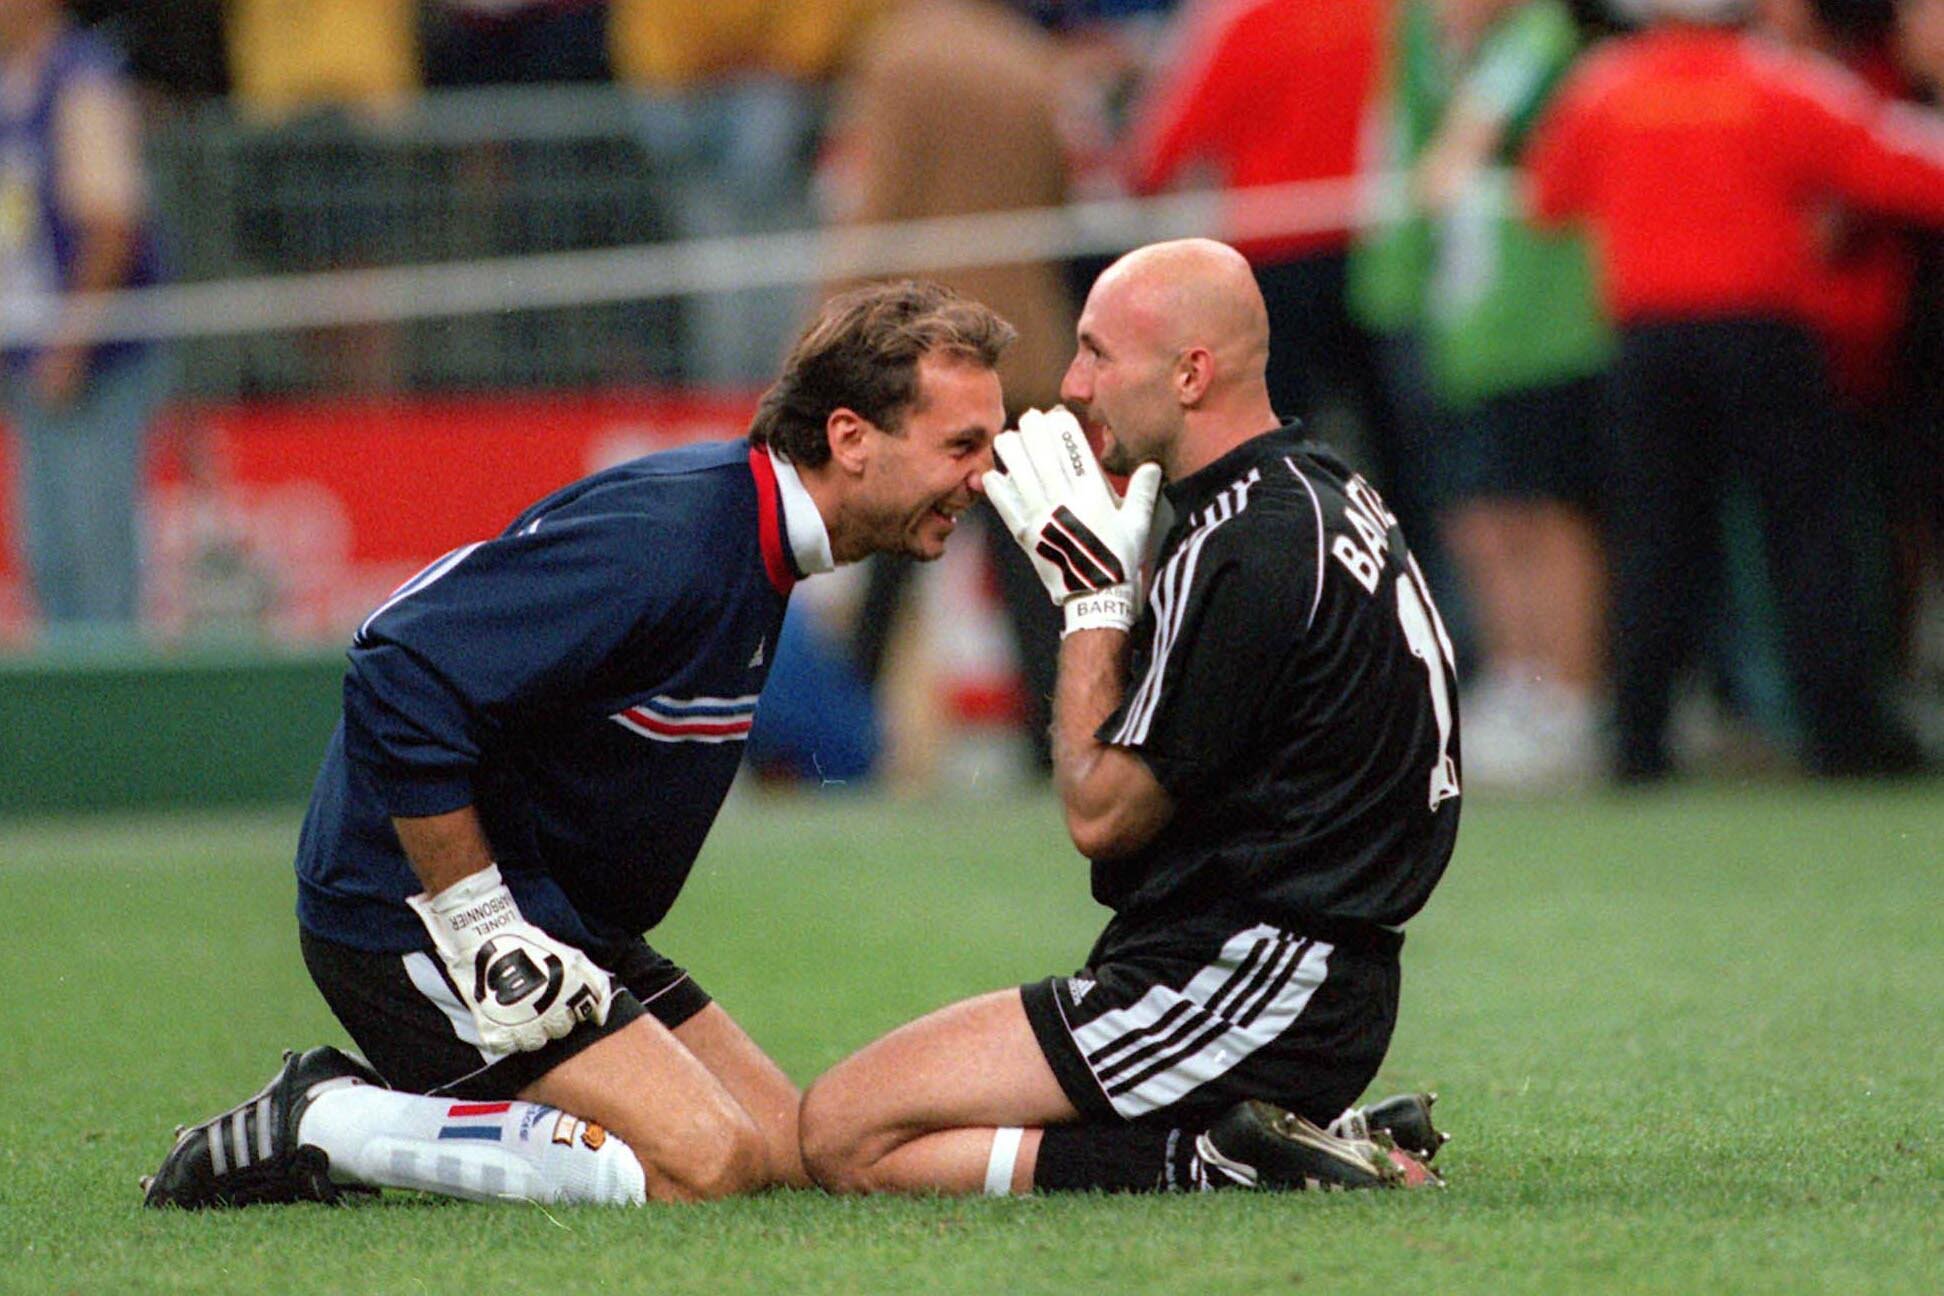 We wish a very happy birthday to one of the great goalkeepers, Fabien Barthez!   